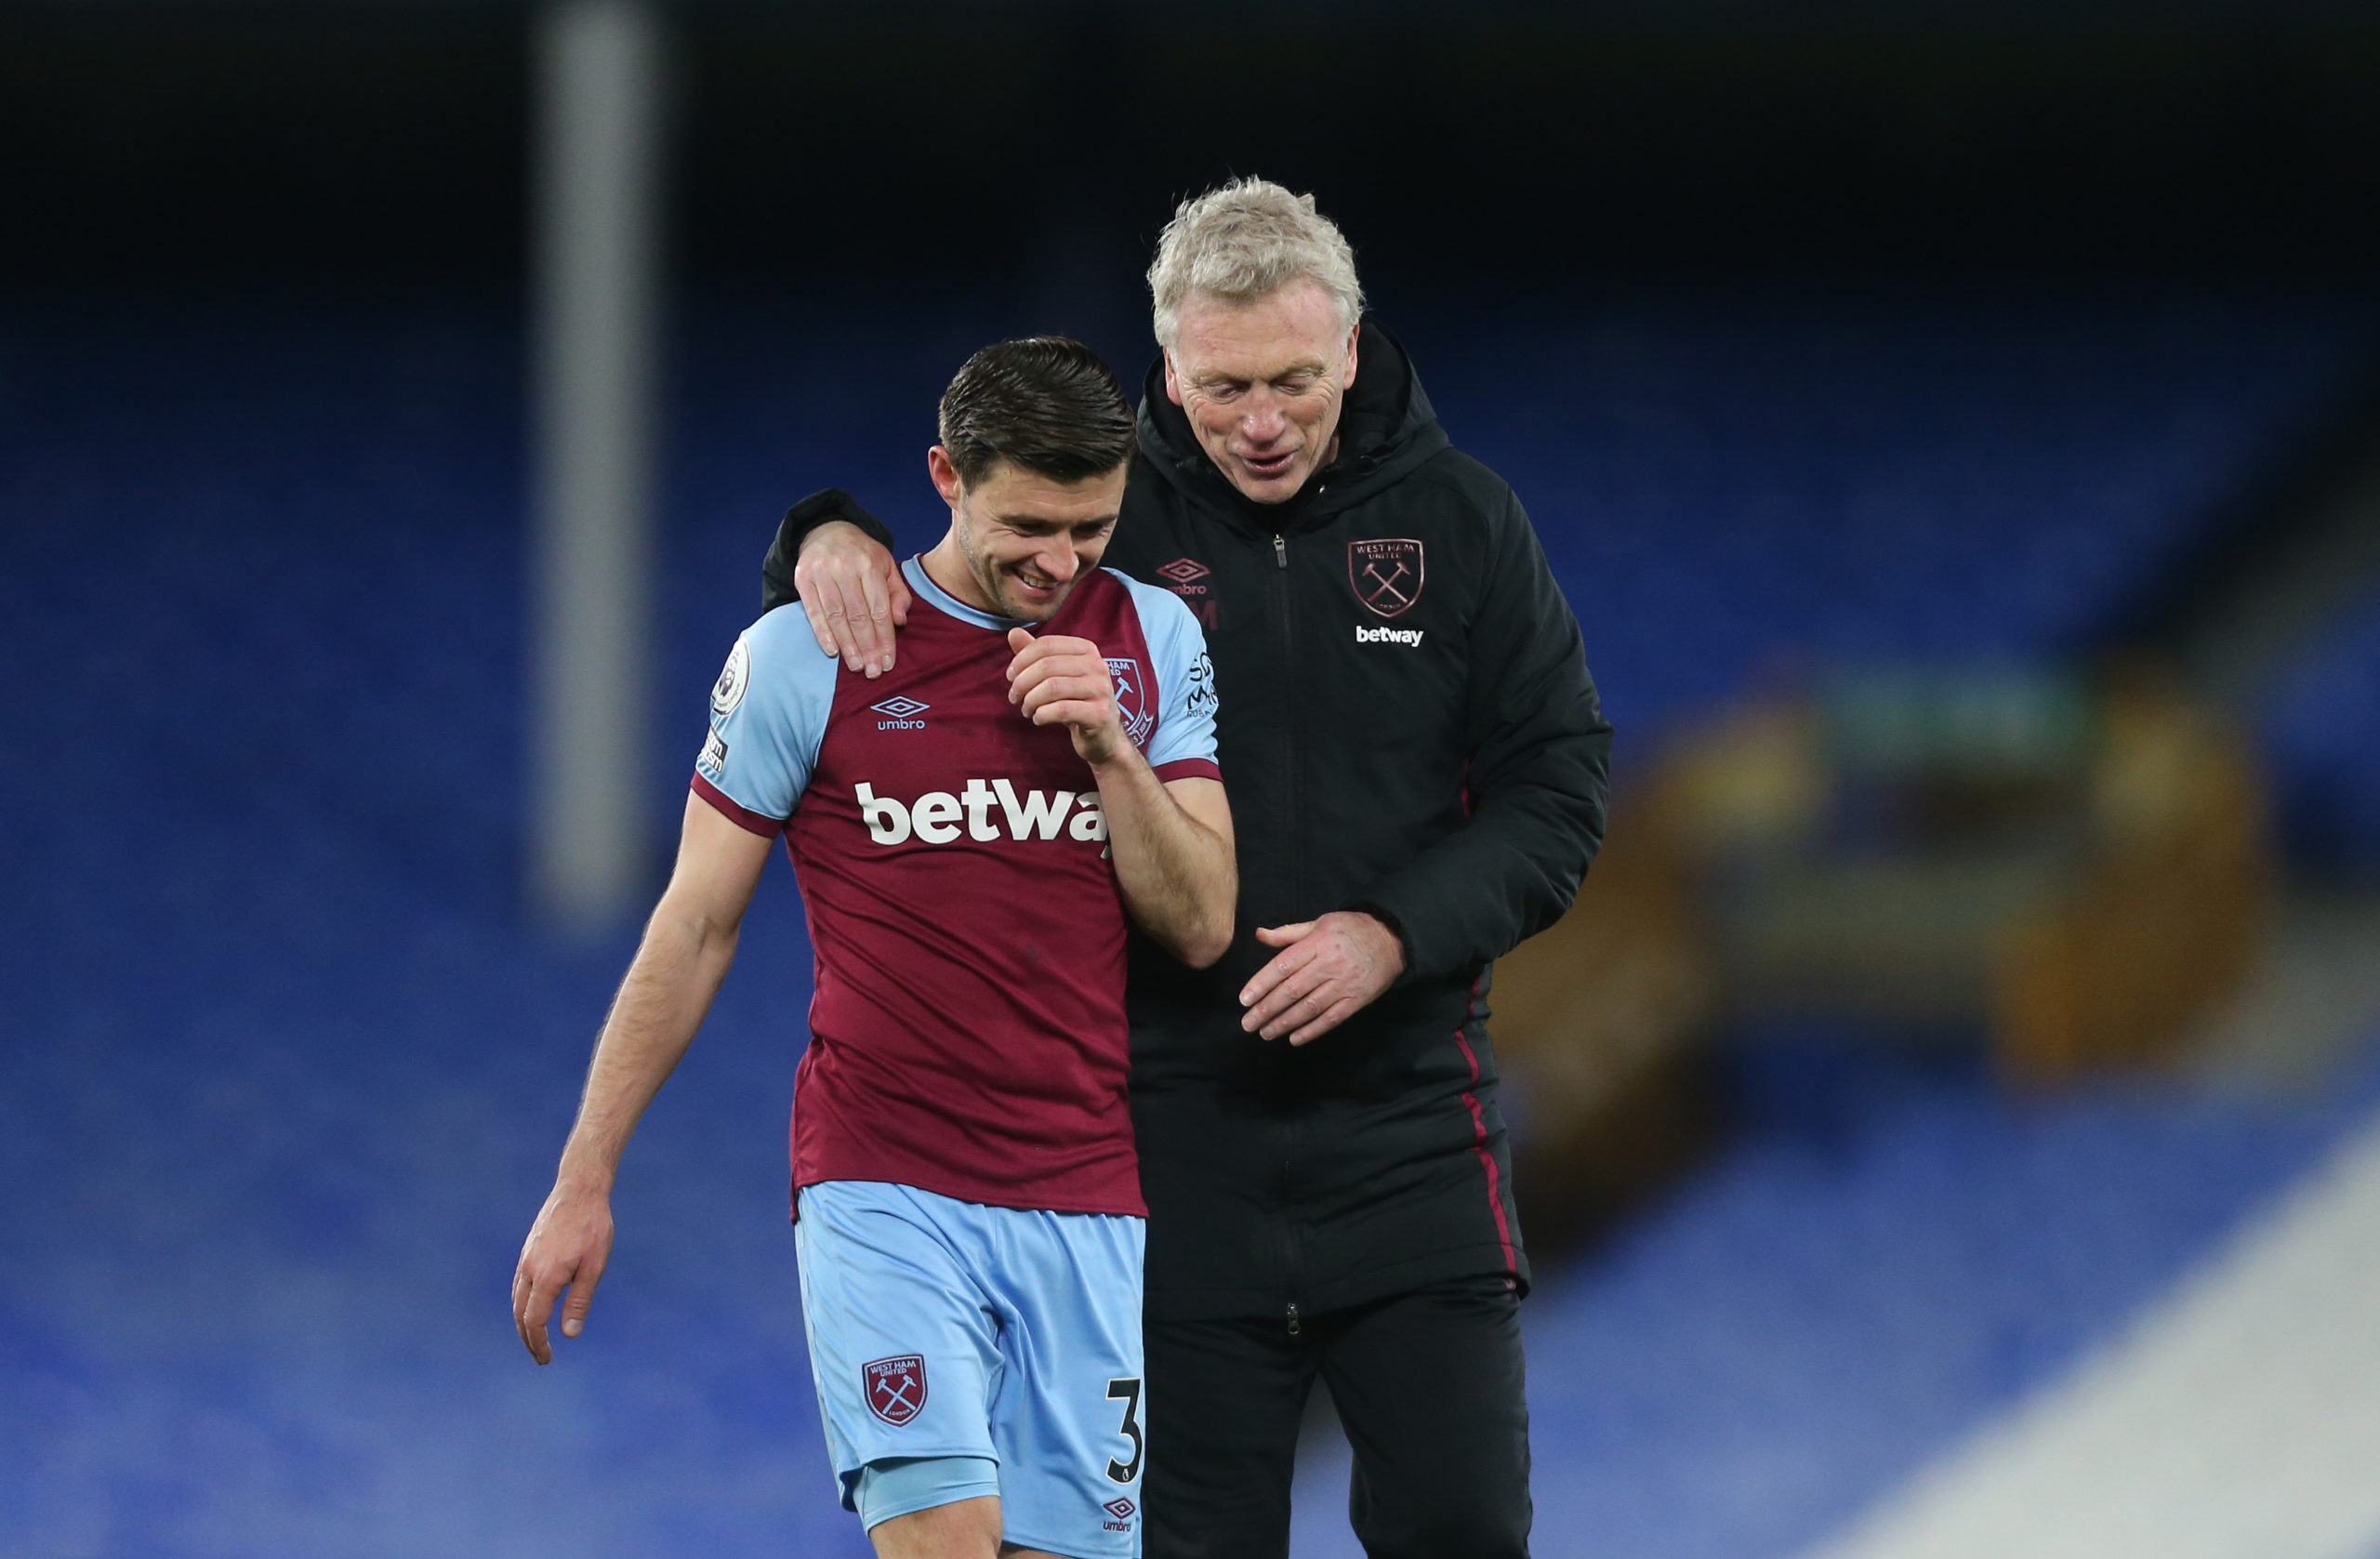 David Moyes makes shock claim about West Ham ace Aaron Cresswell after heroics against Everton